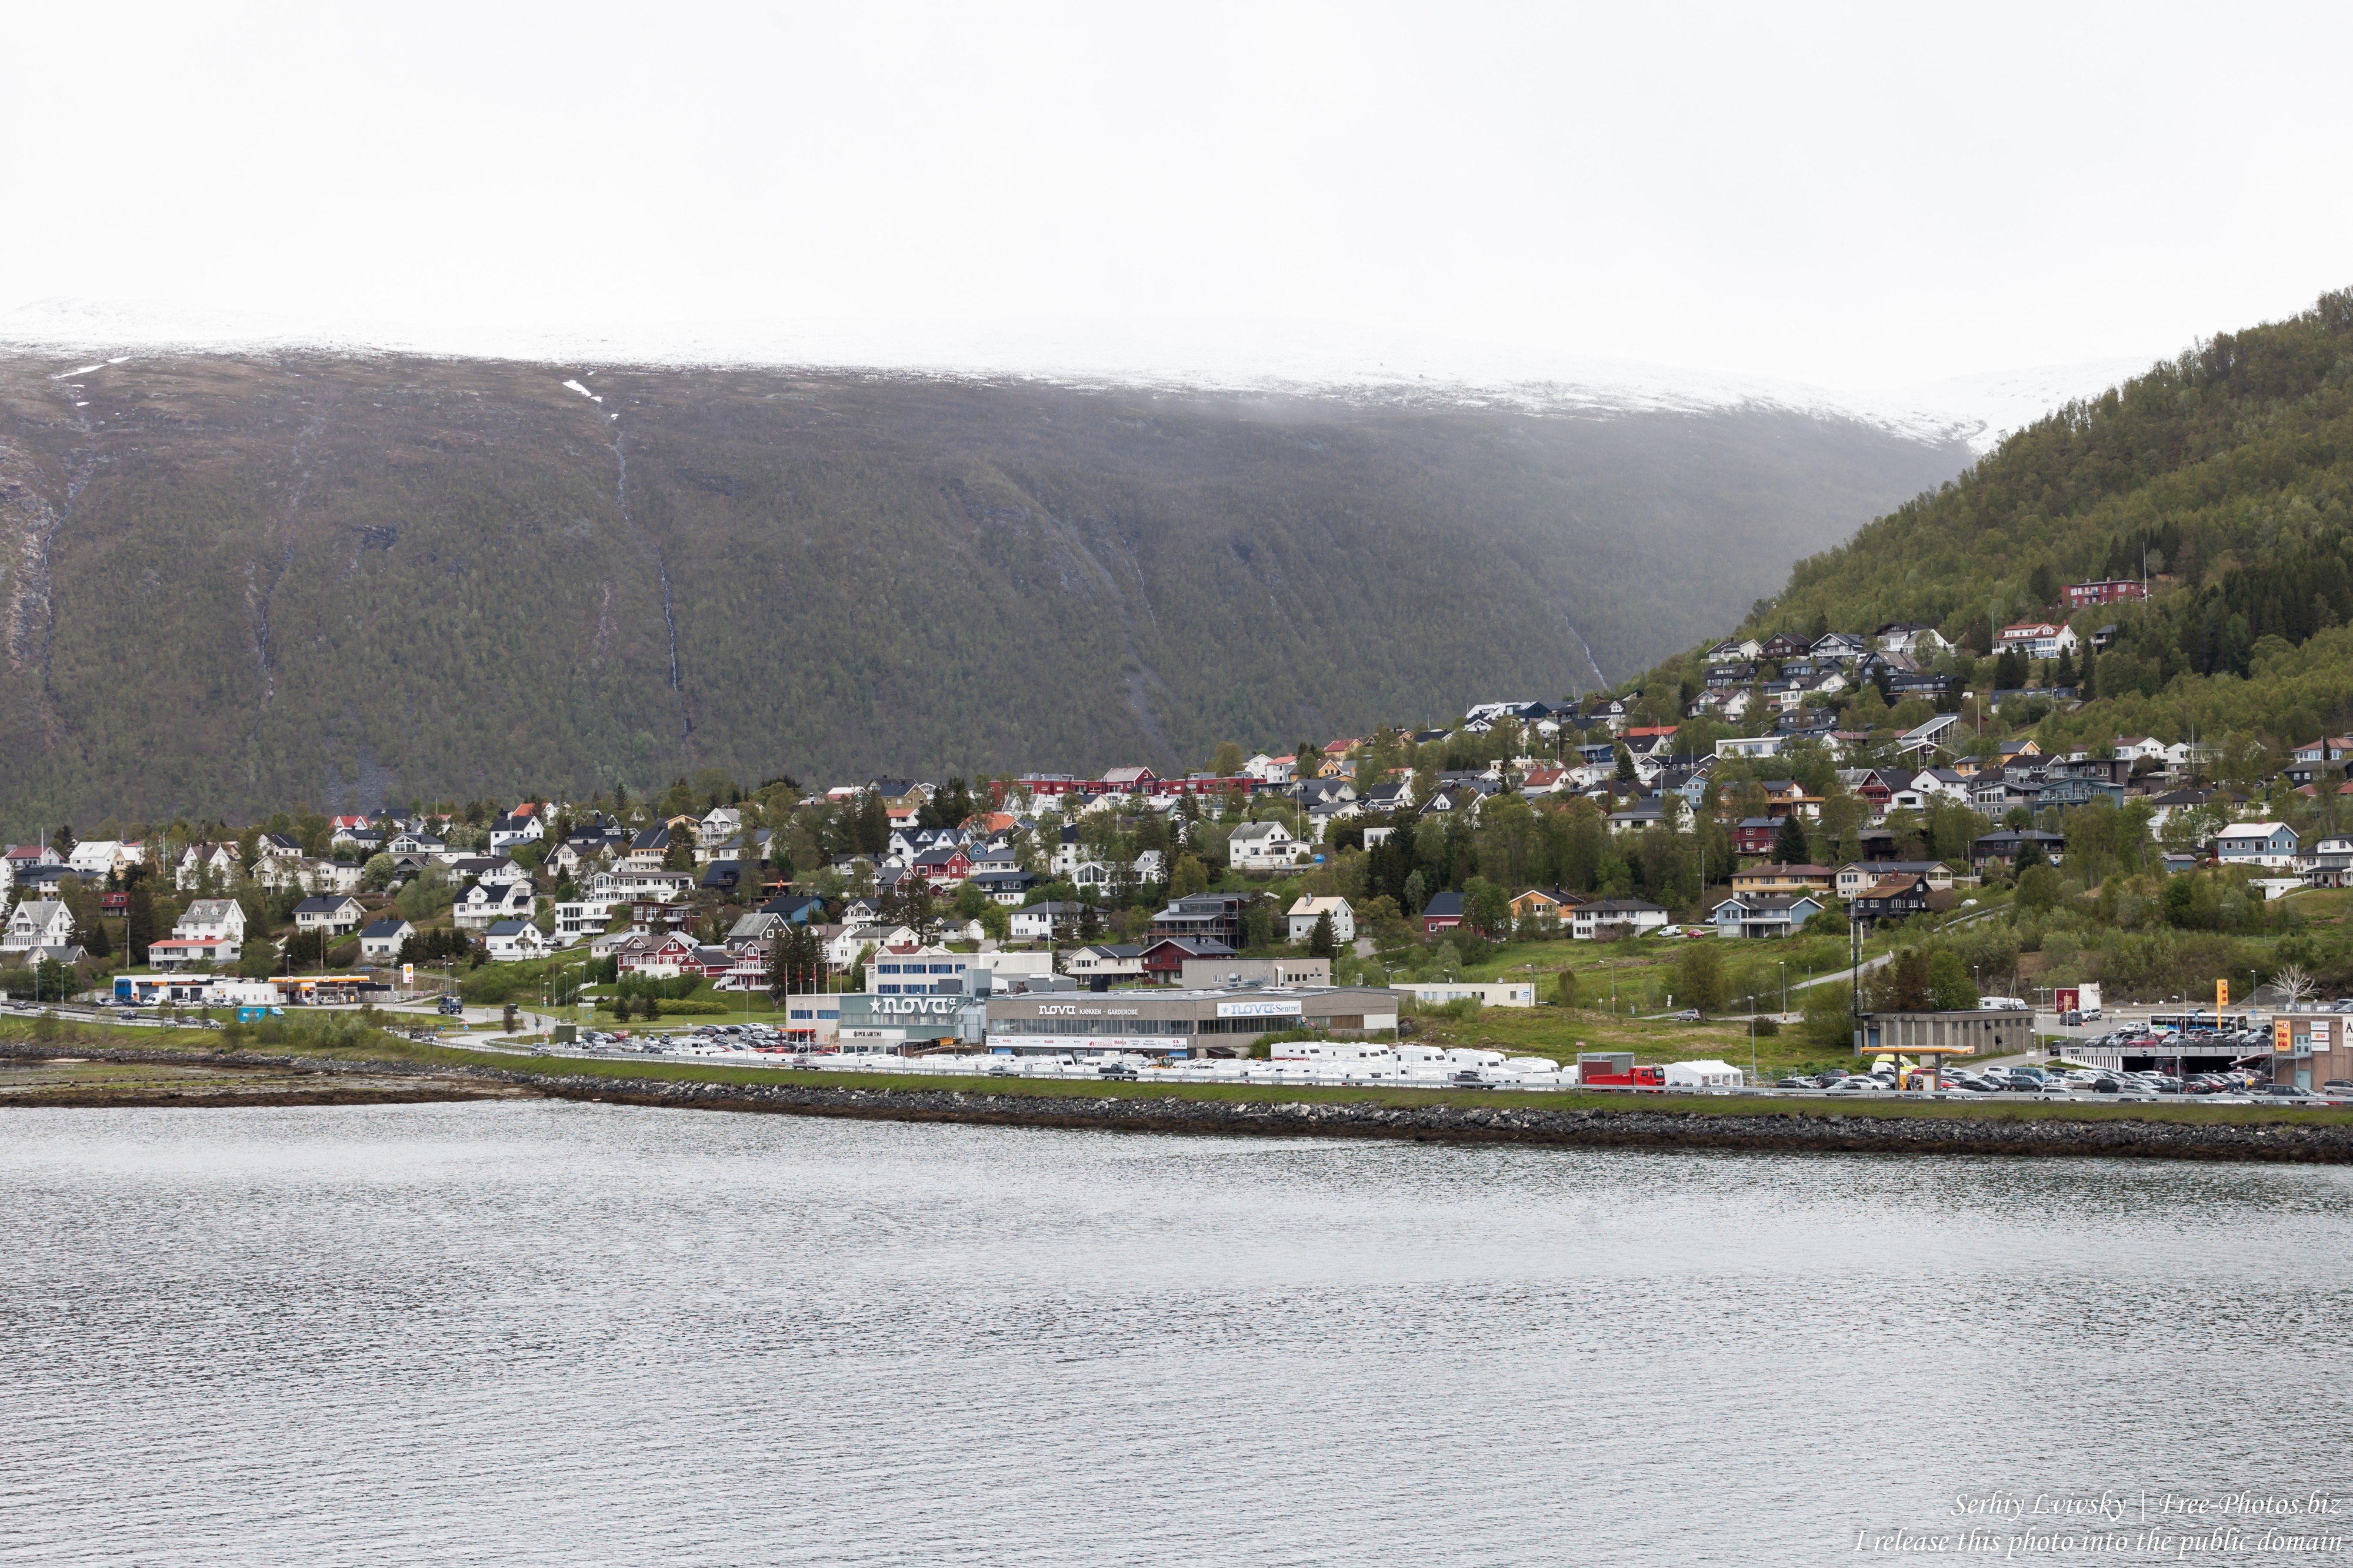 Tromso, Norway, photographed in June 2018 by Serhiy Lvivsky, picture 30